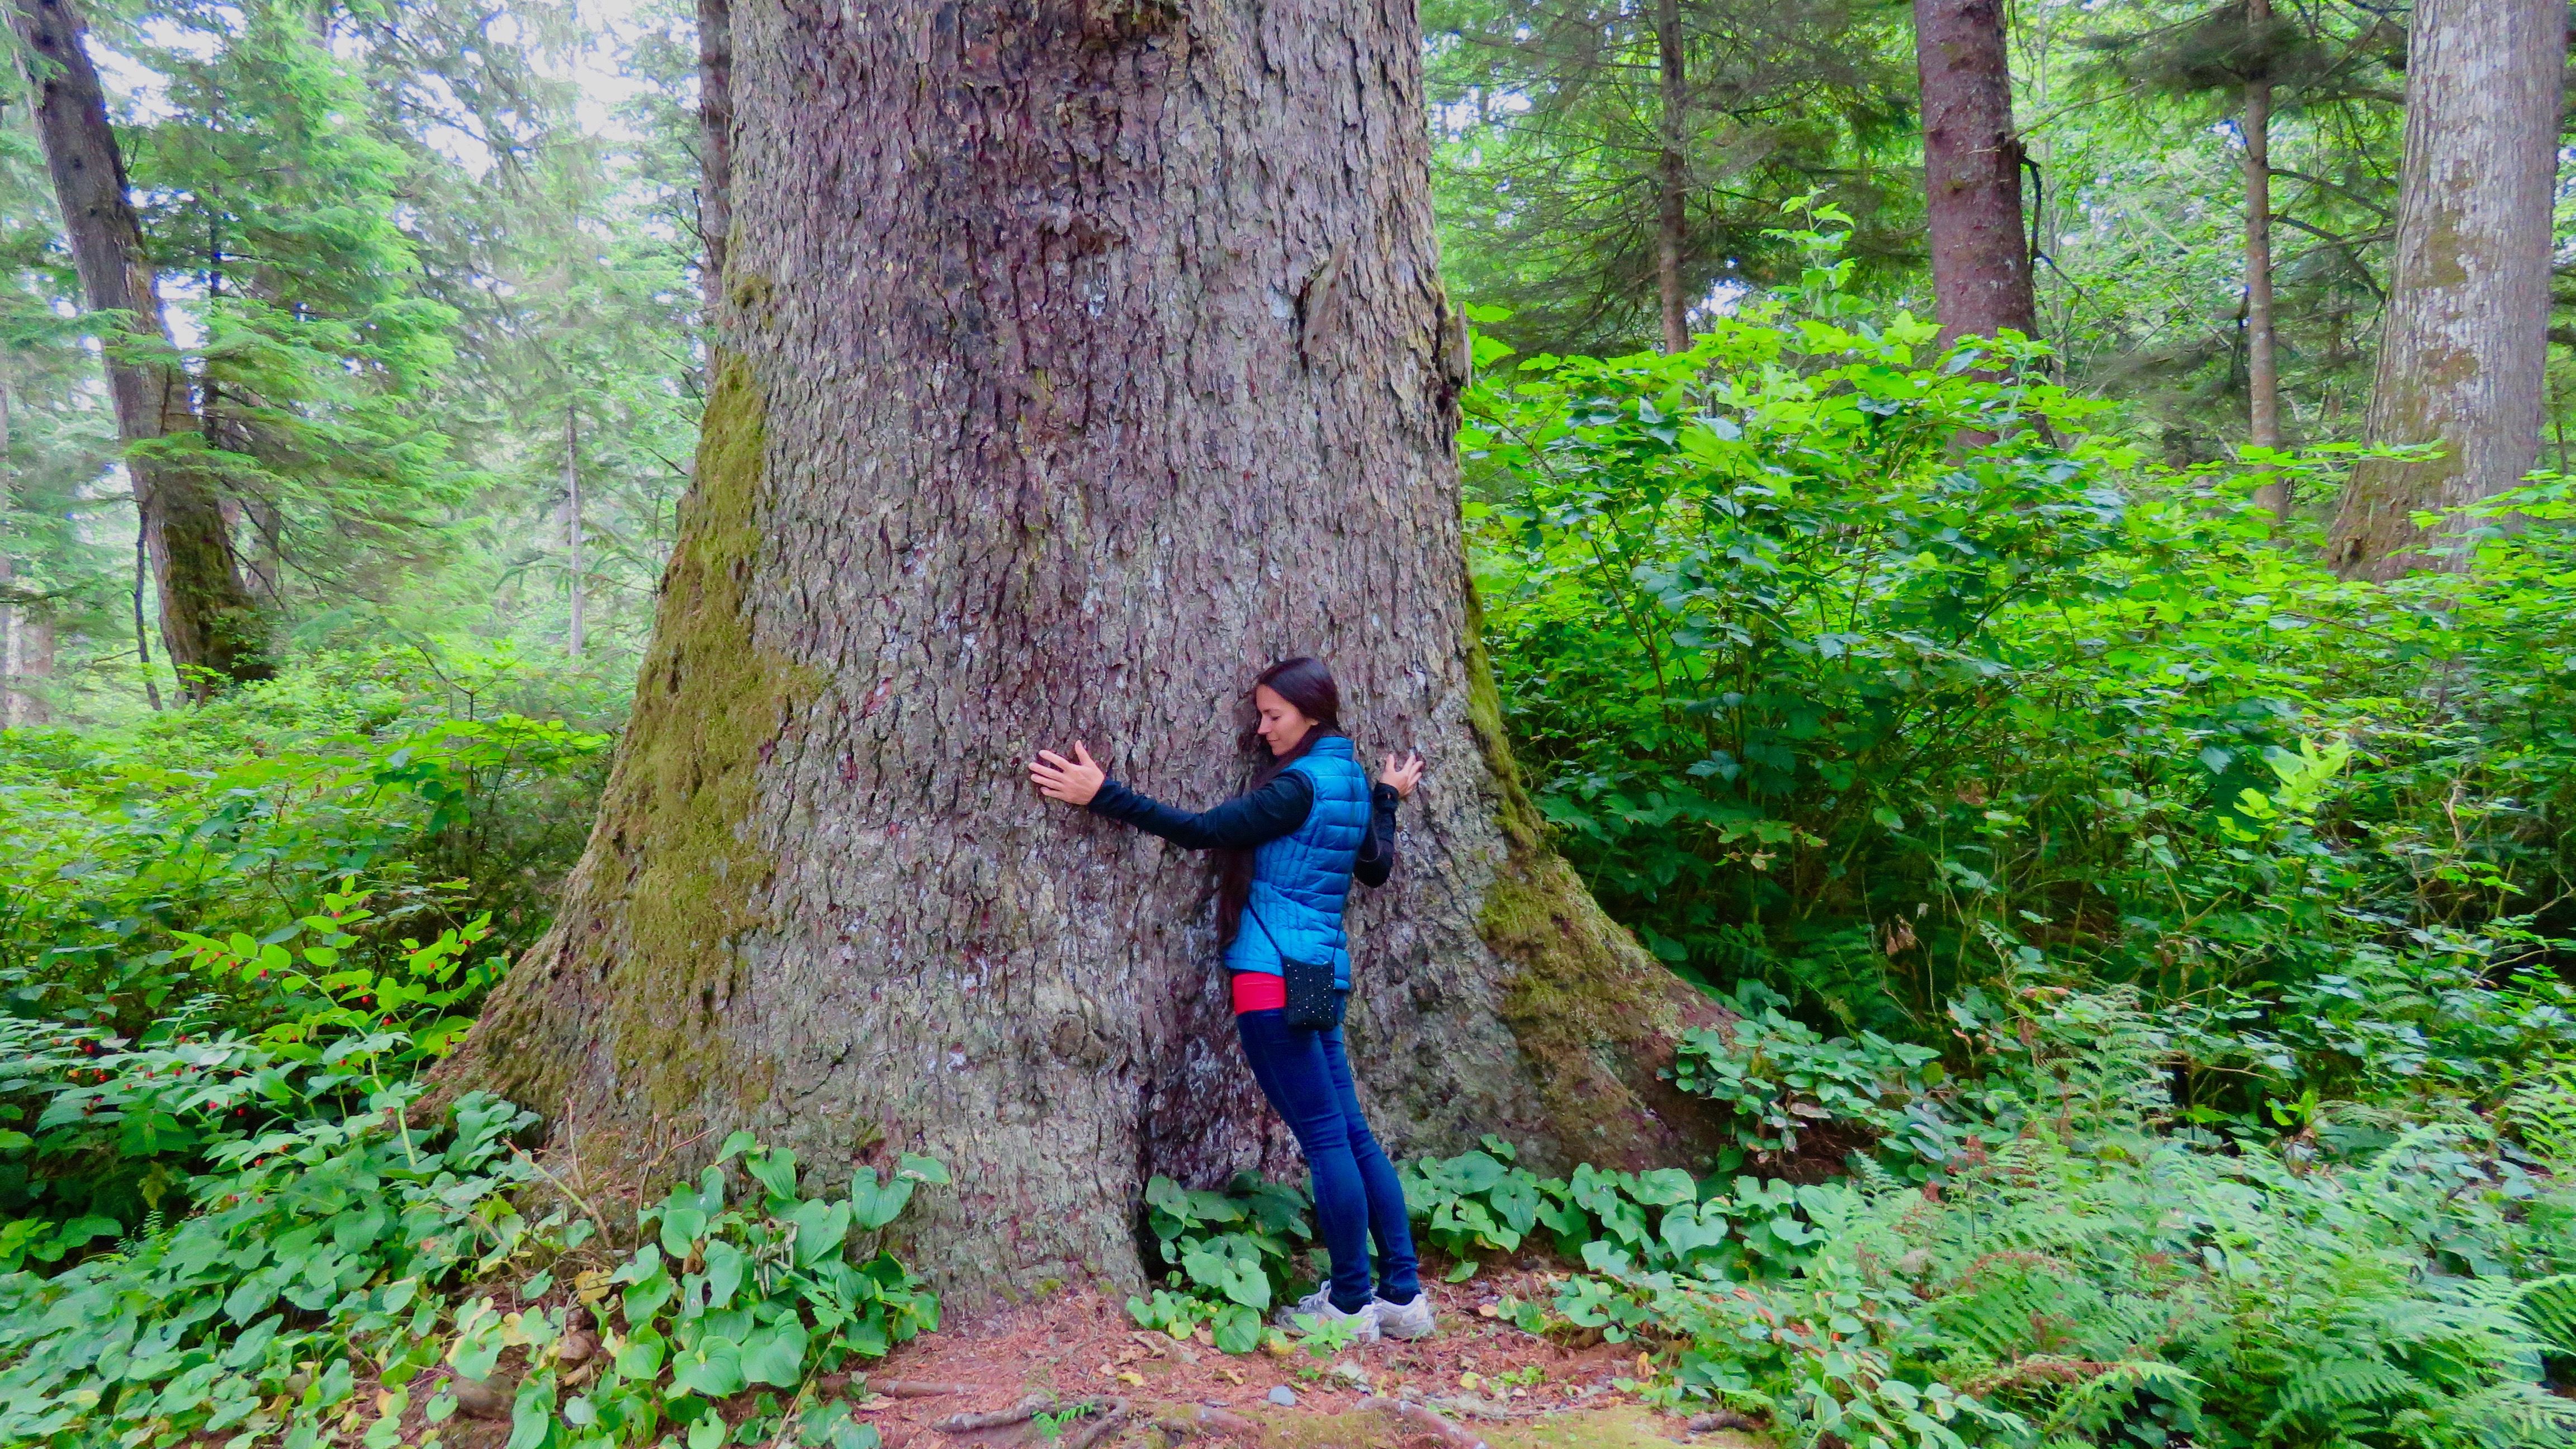 "My Favourite TreeHugger in the WORLD!". photography by @eric-boucher IMG_3158.jpg